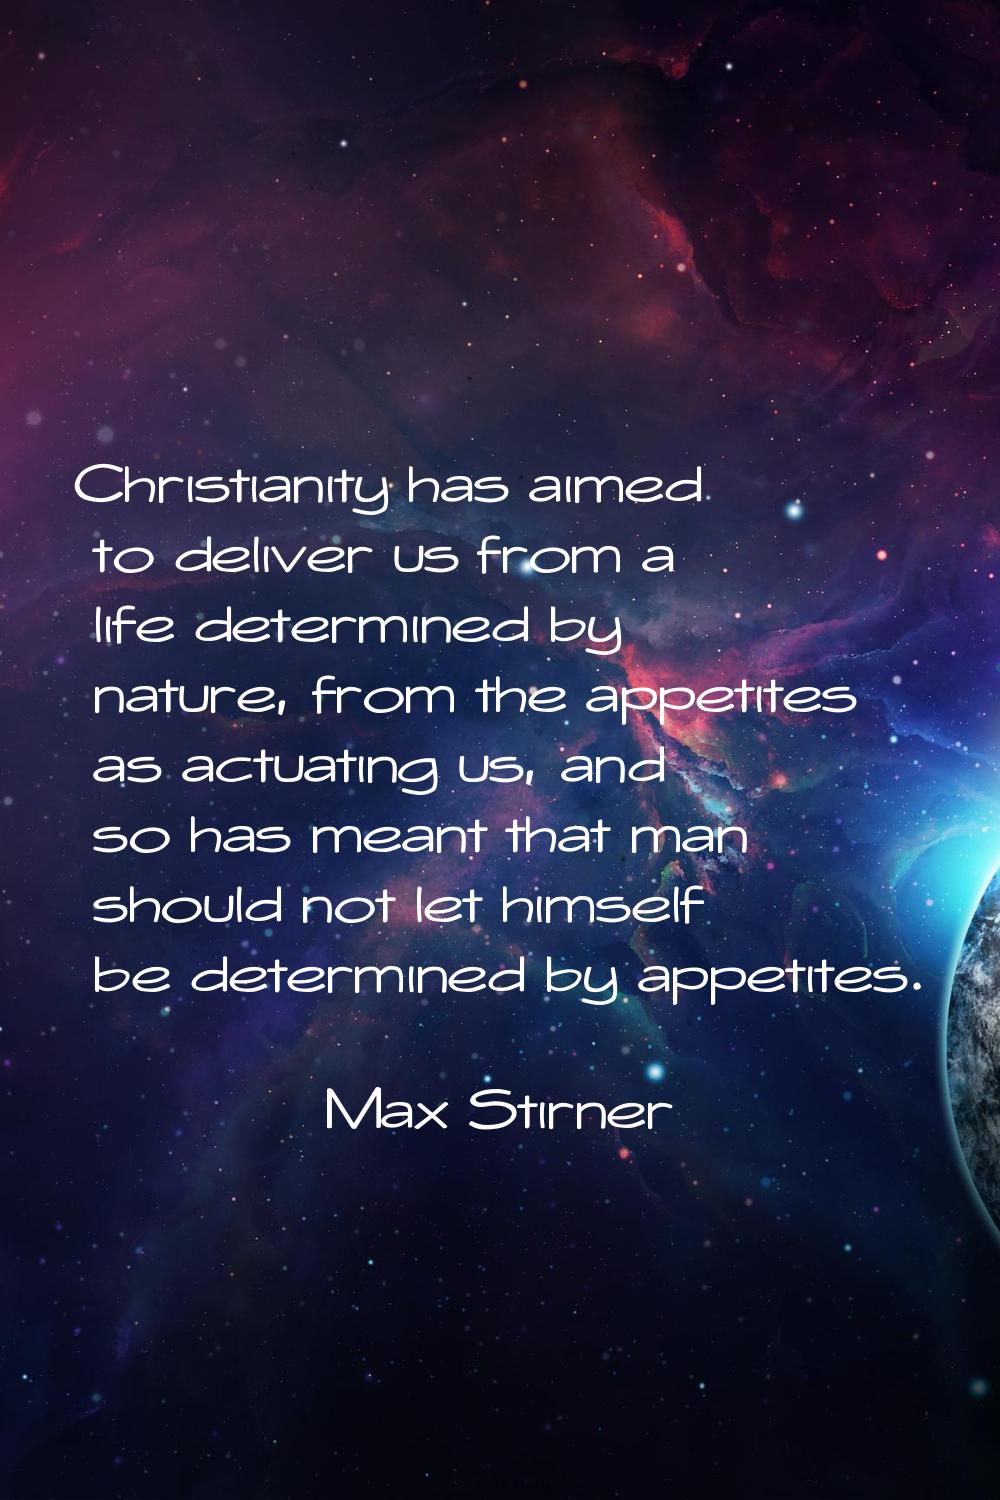 Christianity has aimed to deliver us from a life determined by nature, from the appetites as actuat